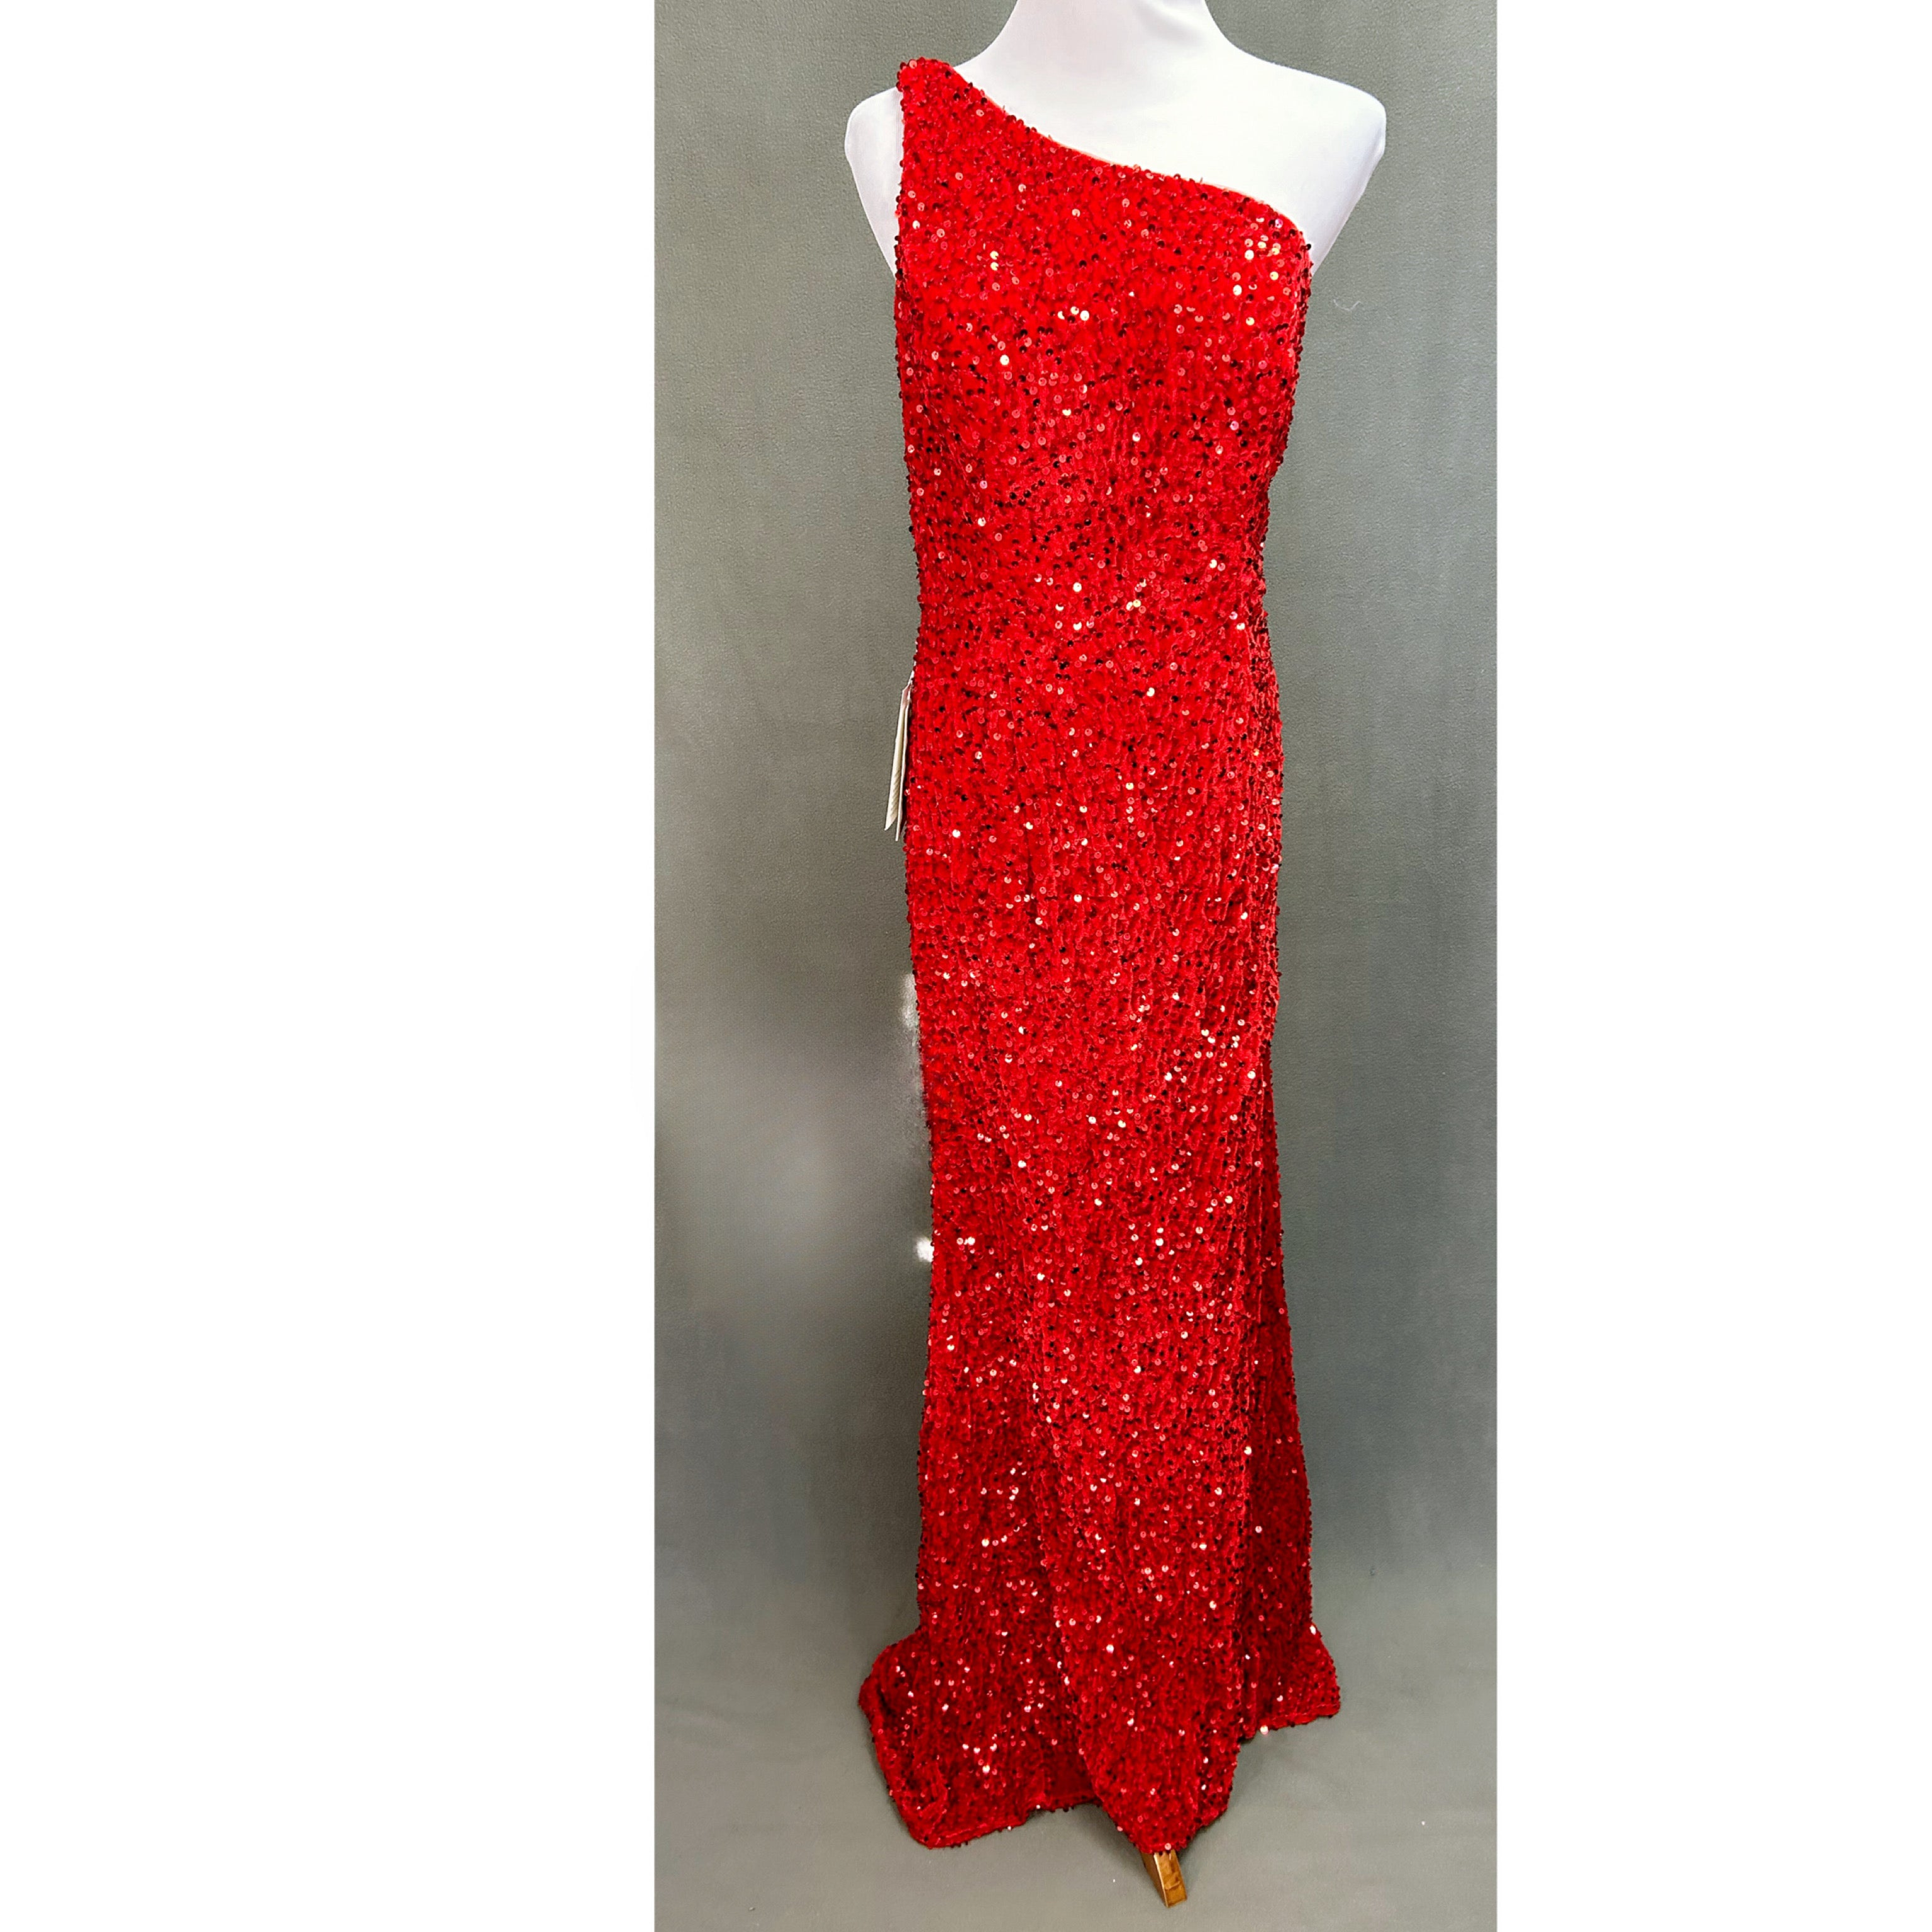 Witness of Love red dress, size 10, NEW WITH TAGS!